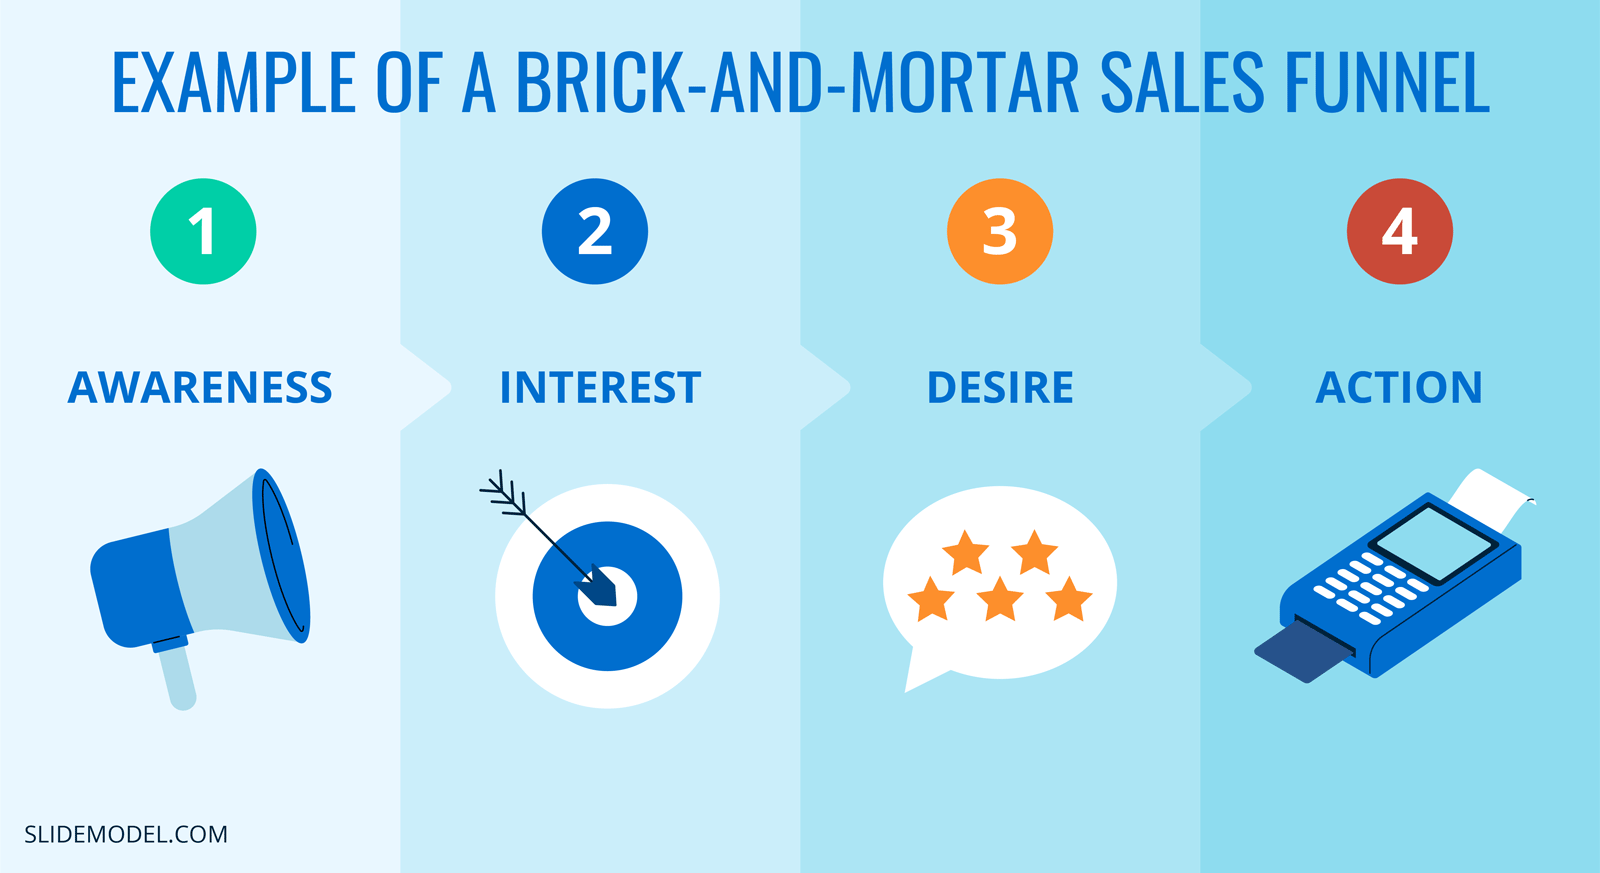 Example of a Brick-and-Mortar Sales Funnel